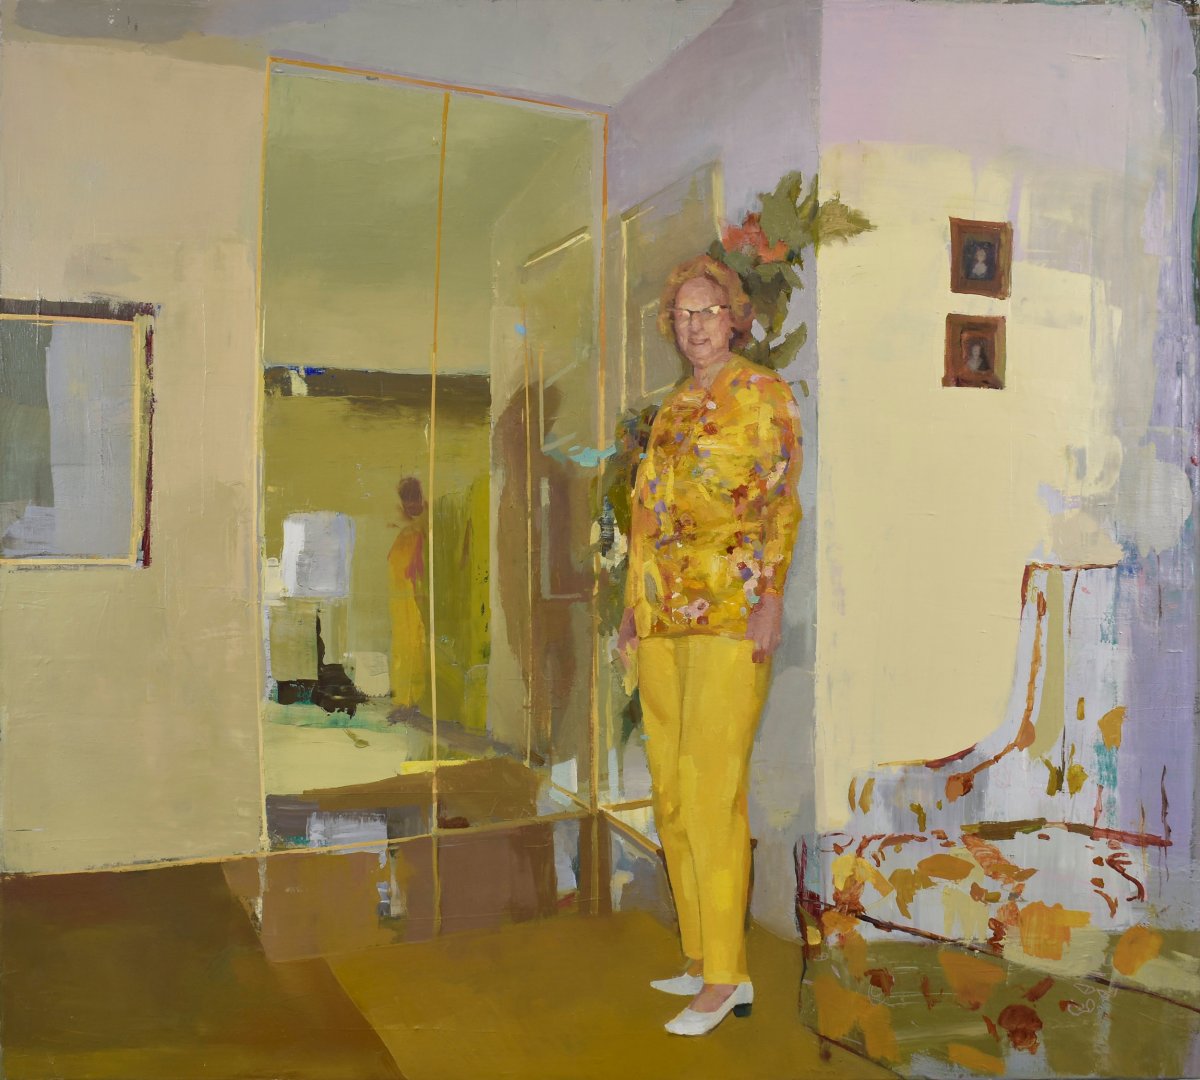 Portrait of a woman dressed in yellow.